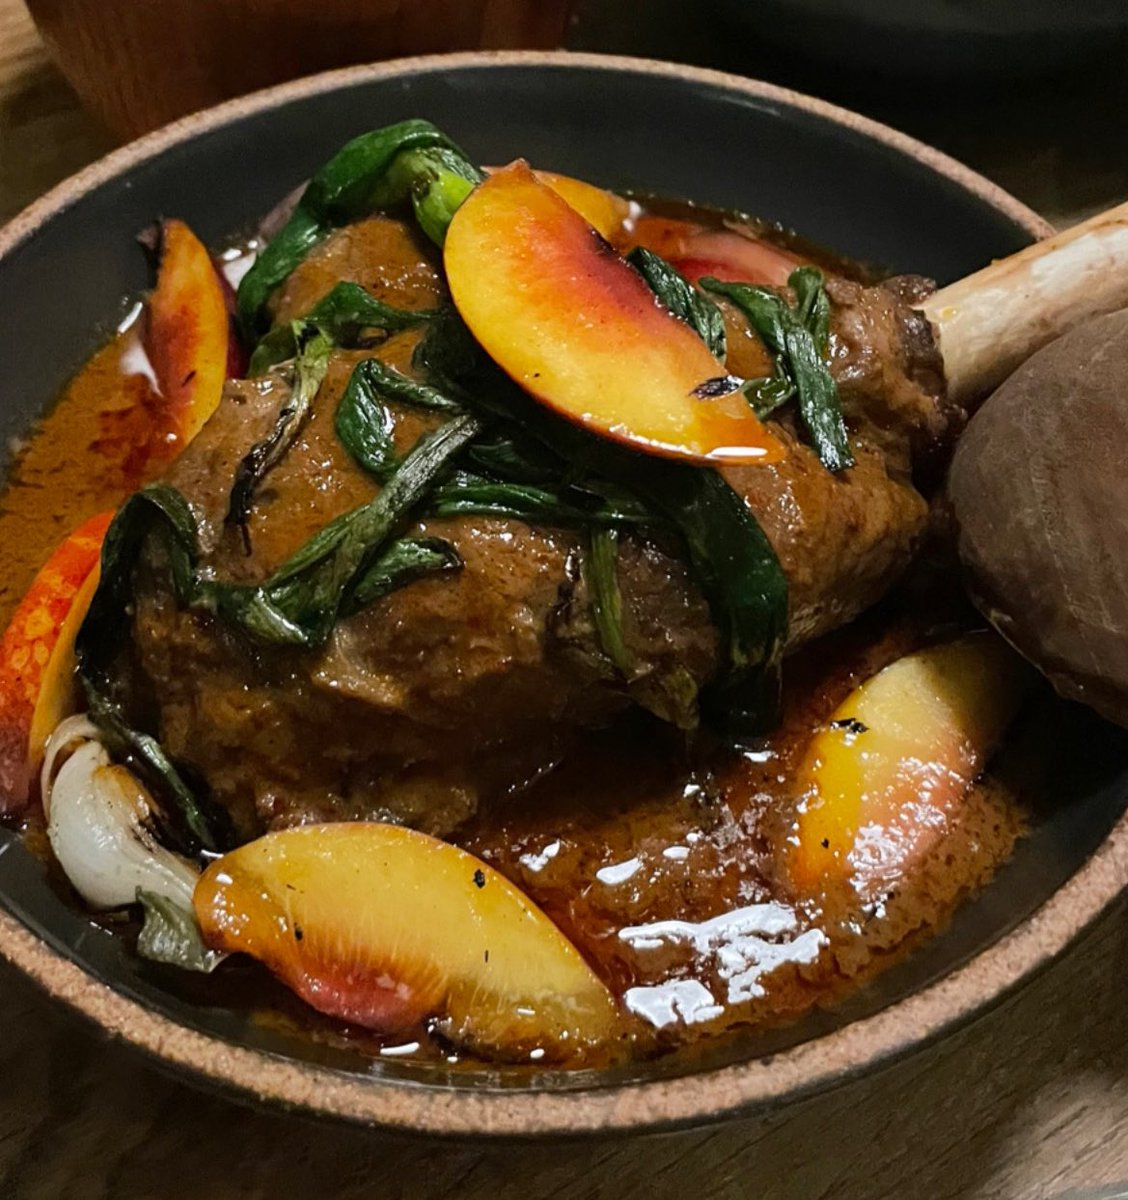 Very excellent dinner at @nari_sf last night — had to stop in for the massaman lamb shank with nectarines before summer is over! Miang Pla with trout roe and the squid and pork jowl were also particularly bangin!